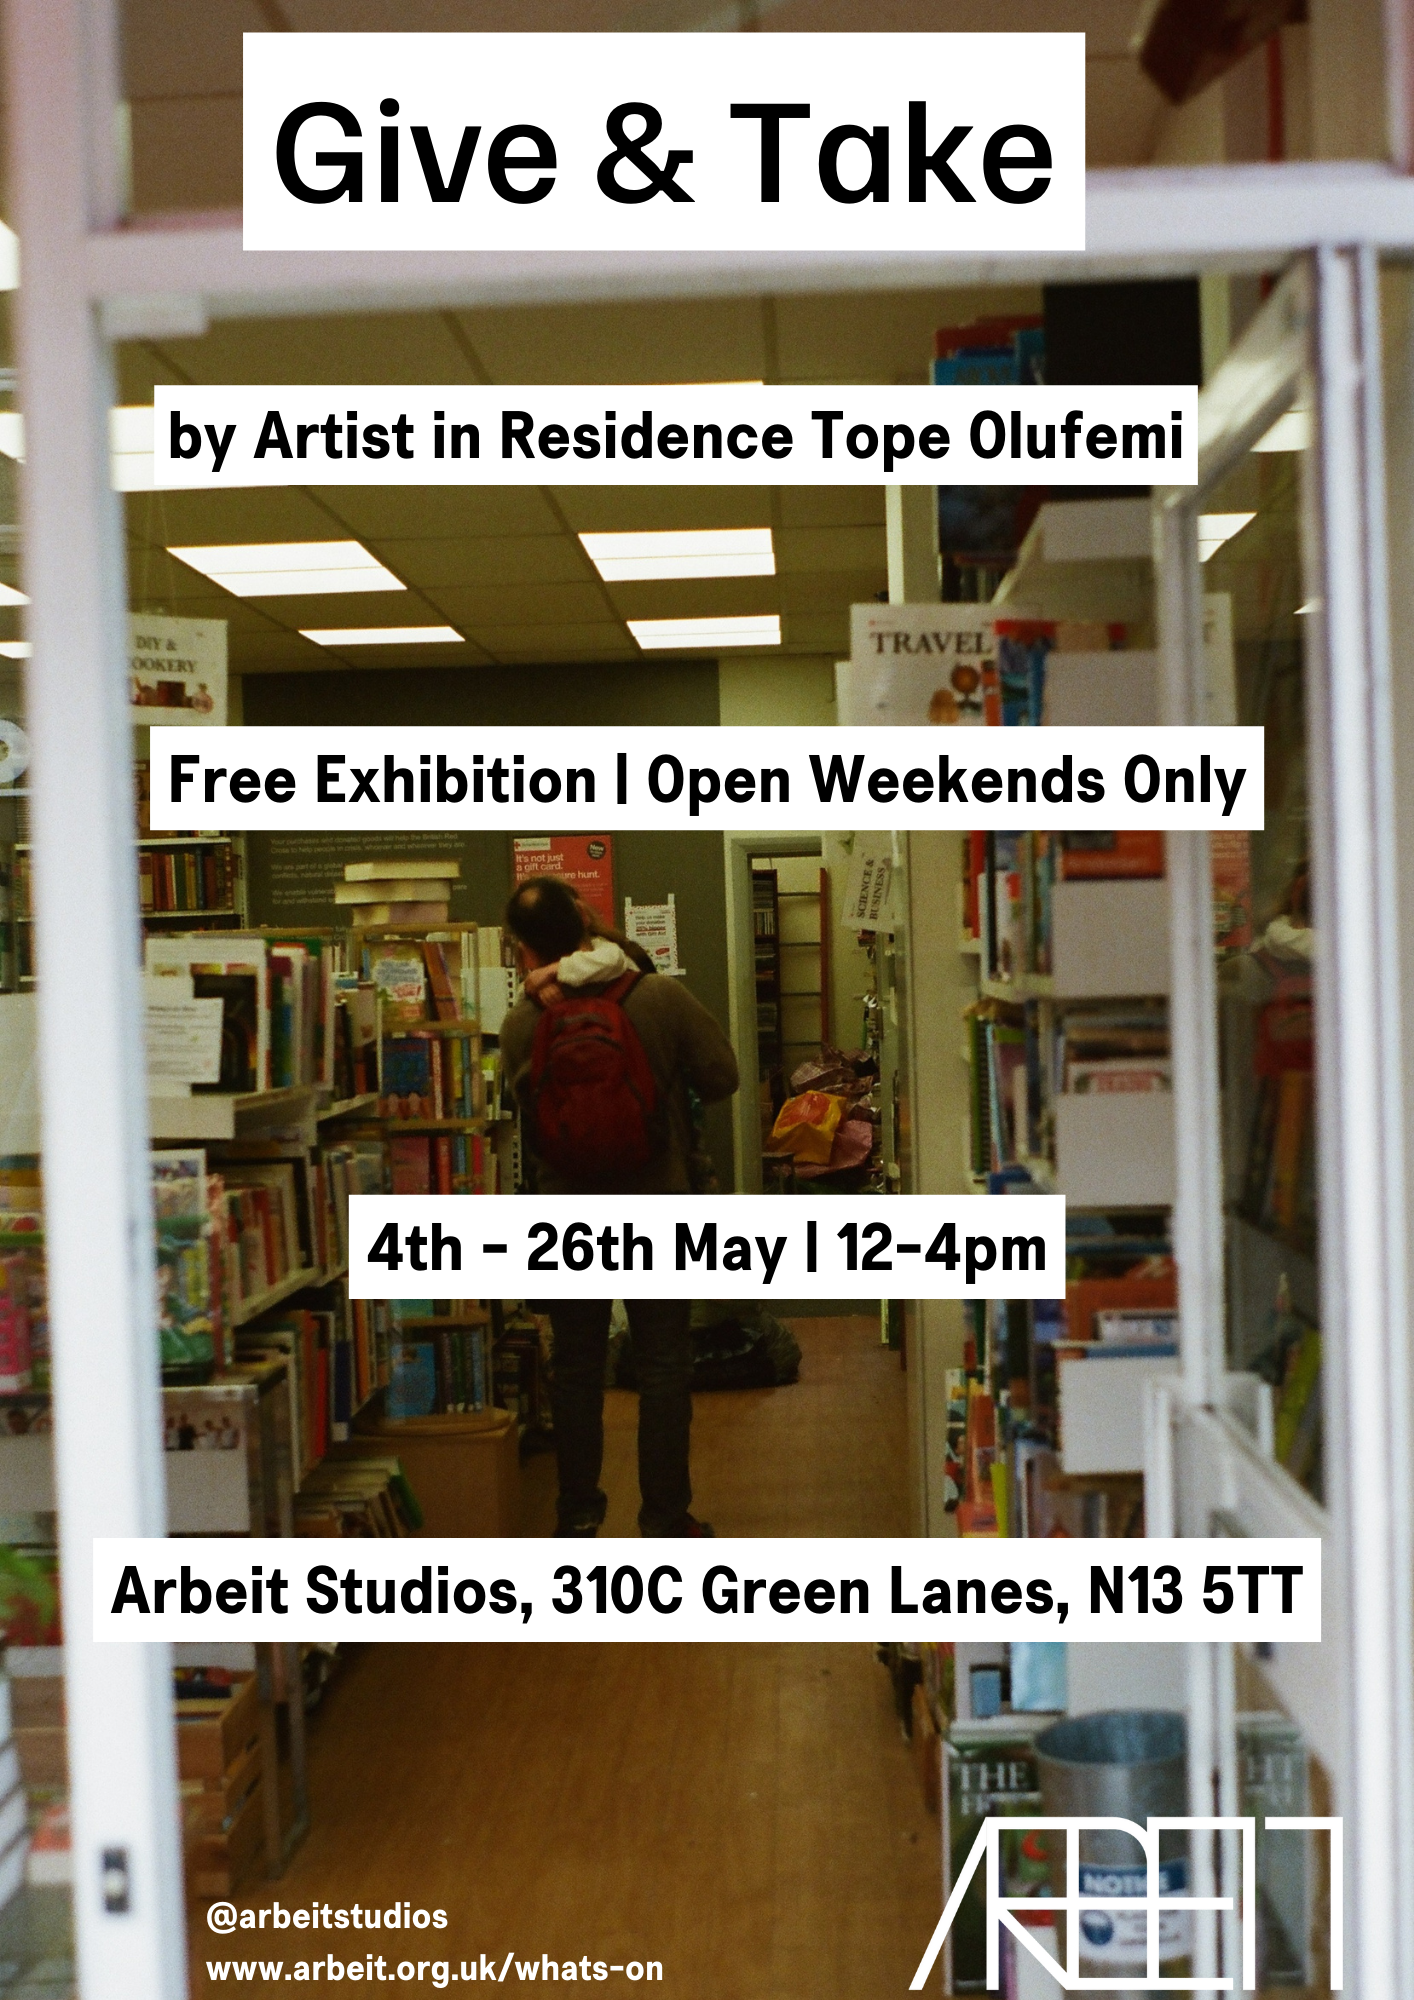 poster or flyer advertising event Give & Take: Exhibition by Arbeit Artist in Residence Tope Olufemi